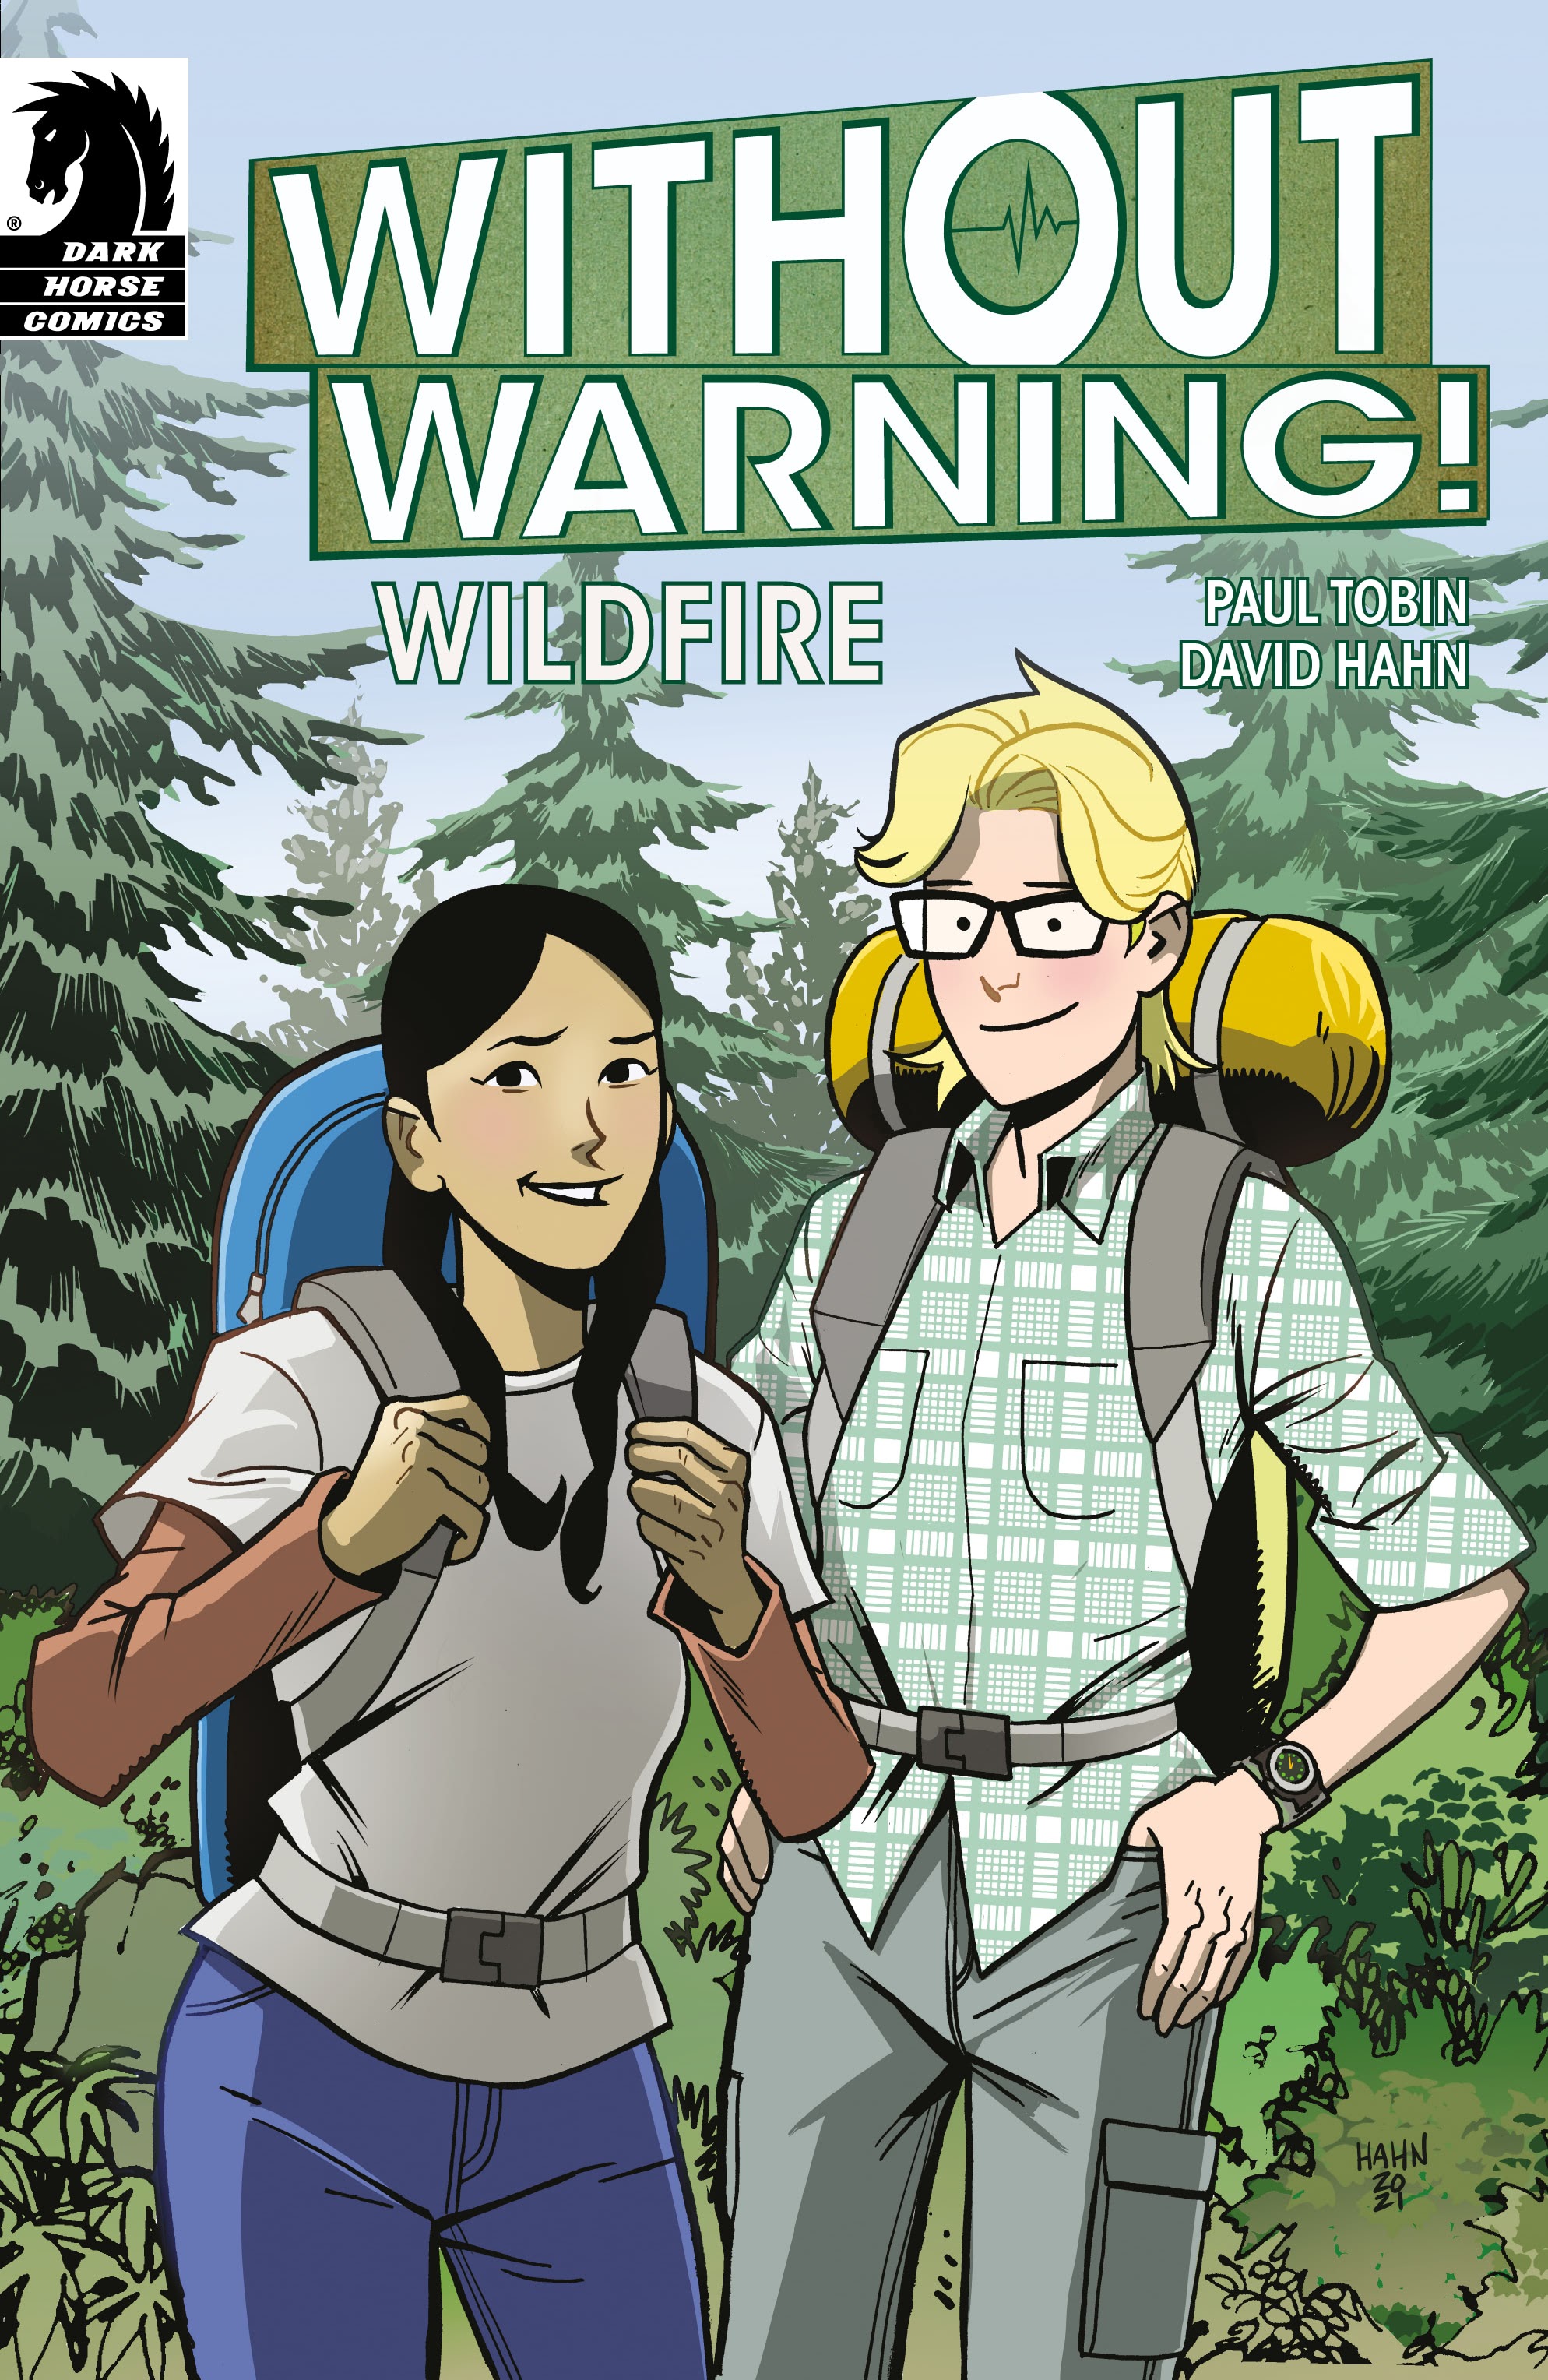 Read online Without Warning! comic -  Issue # Wildfire Safety - 1